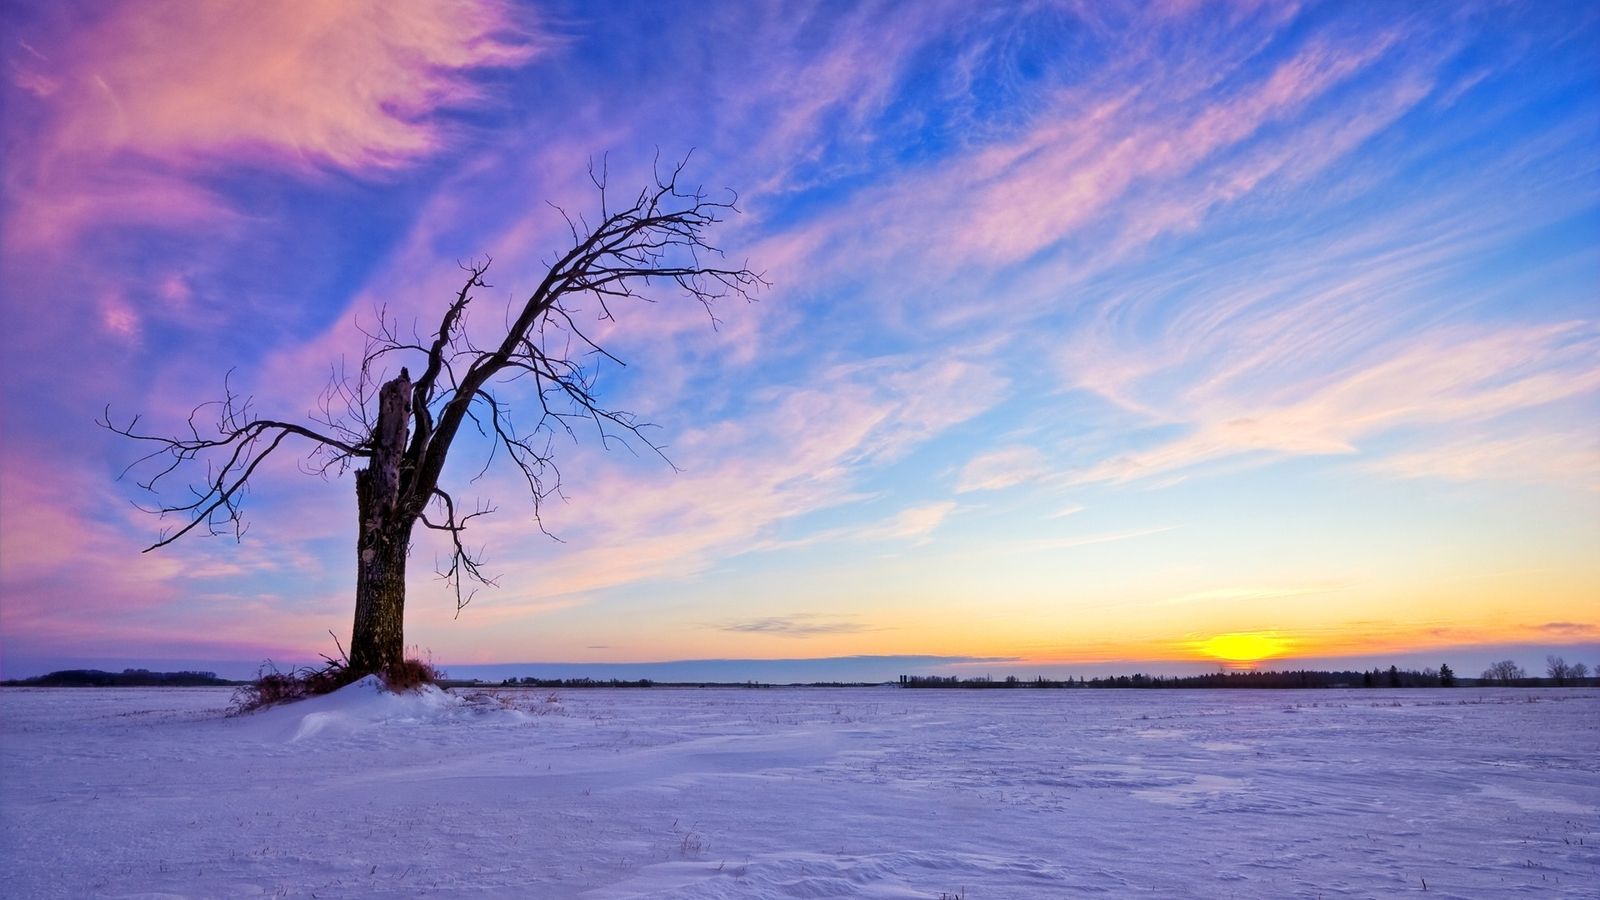 A tree in a snowy field with a sunset in the background - Landscape